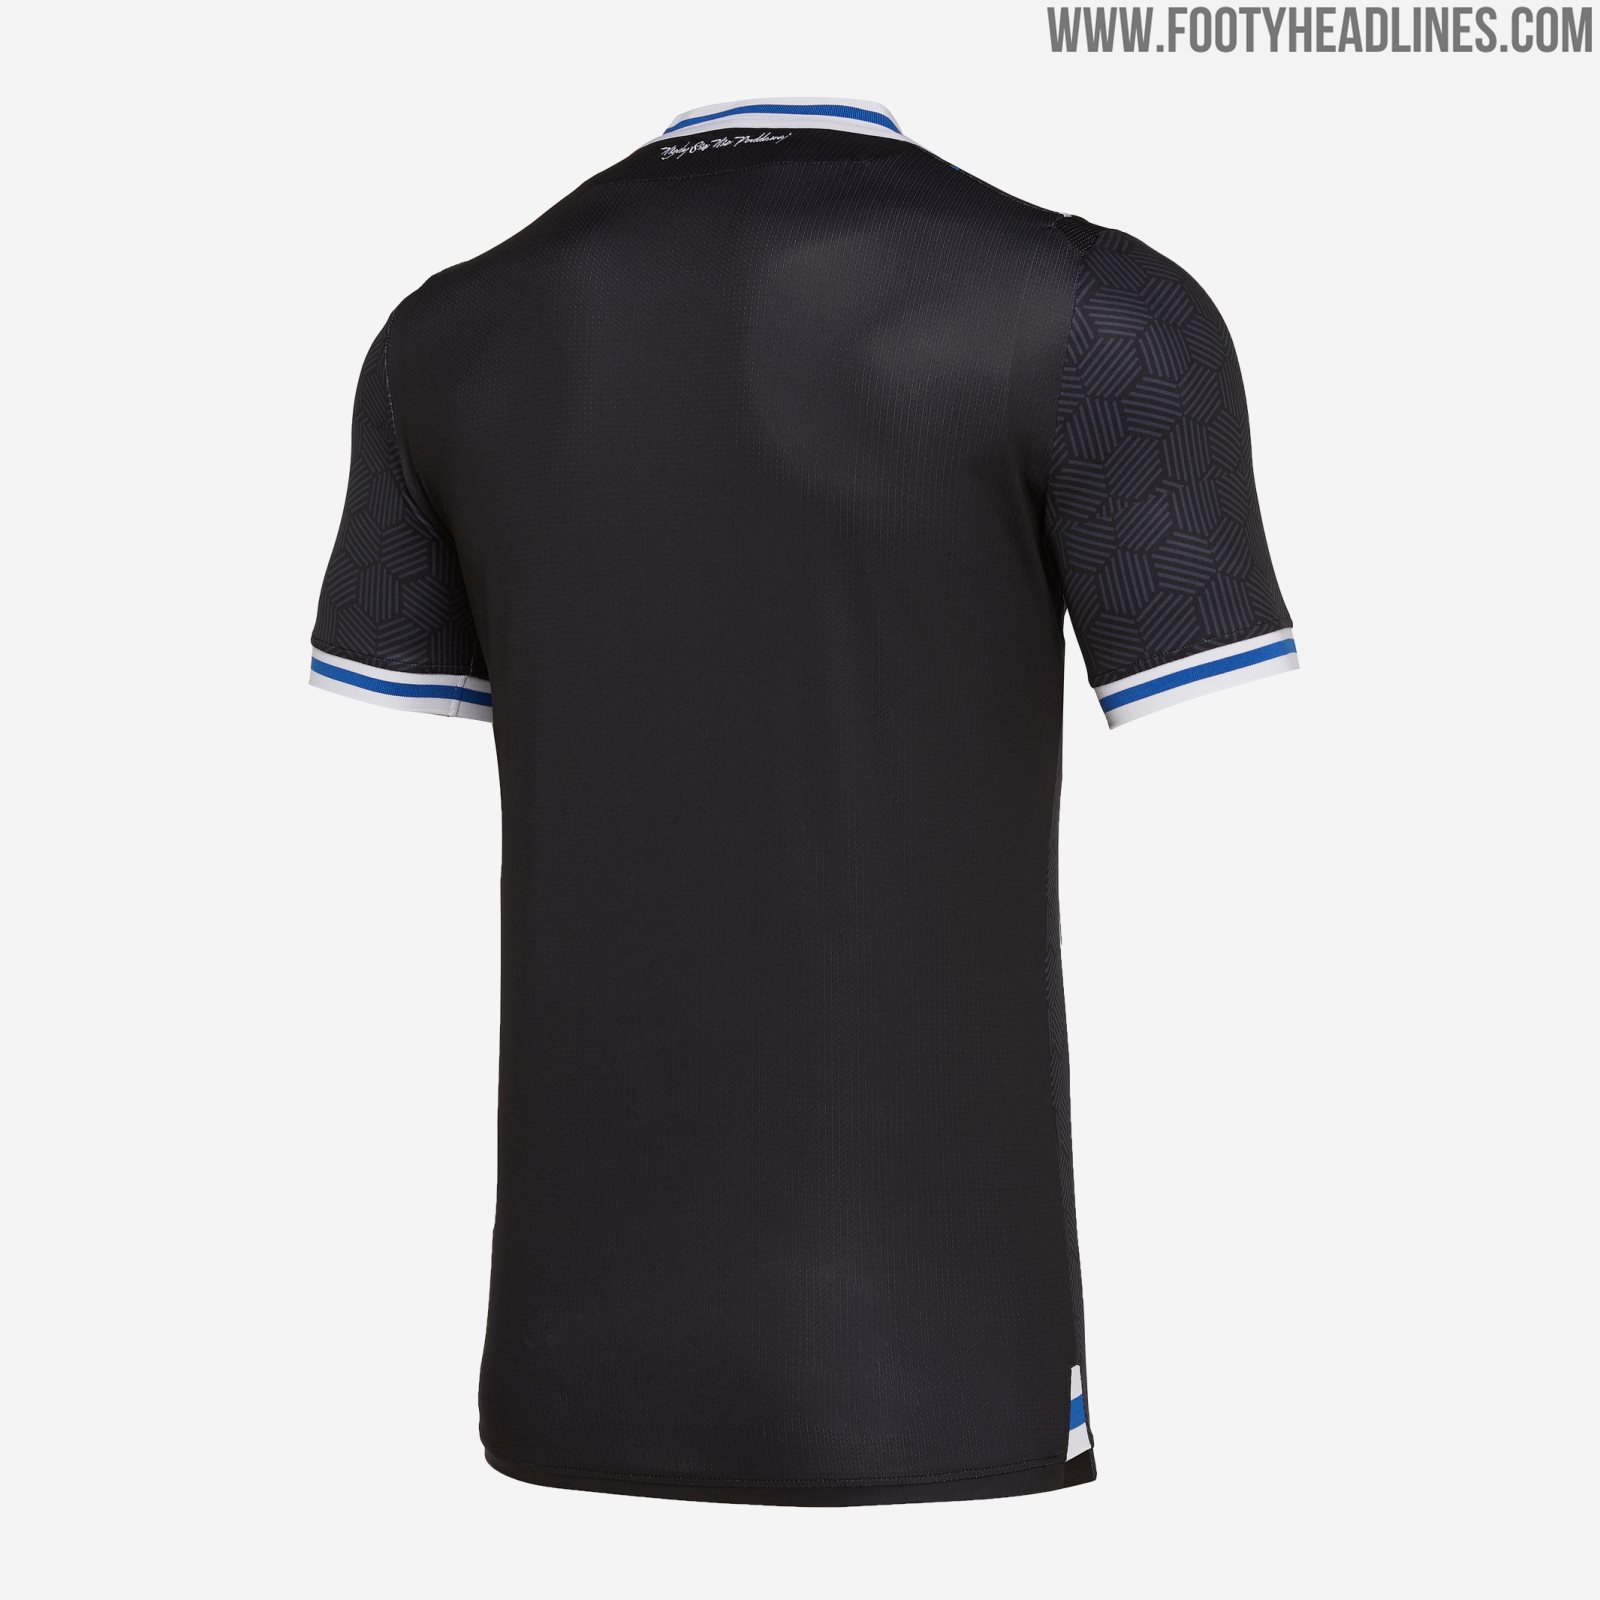 Lech Poznan 19-20 Home, Away & Third Kits Released - Footy Headlines